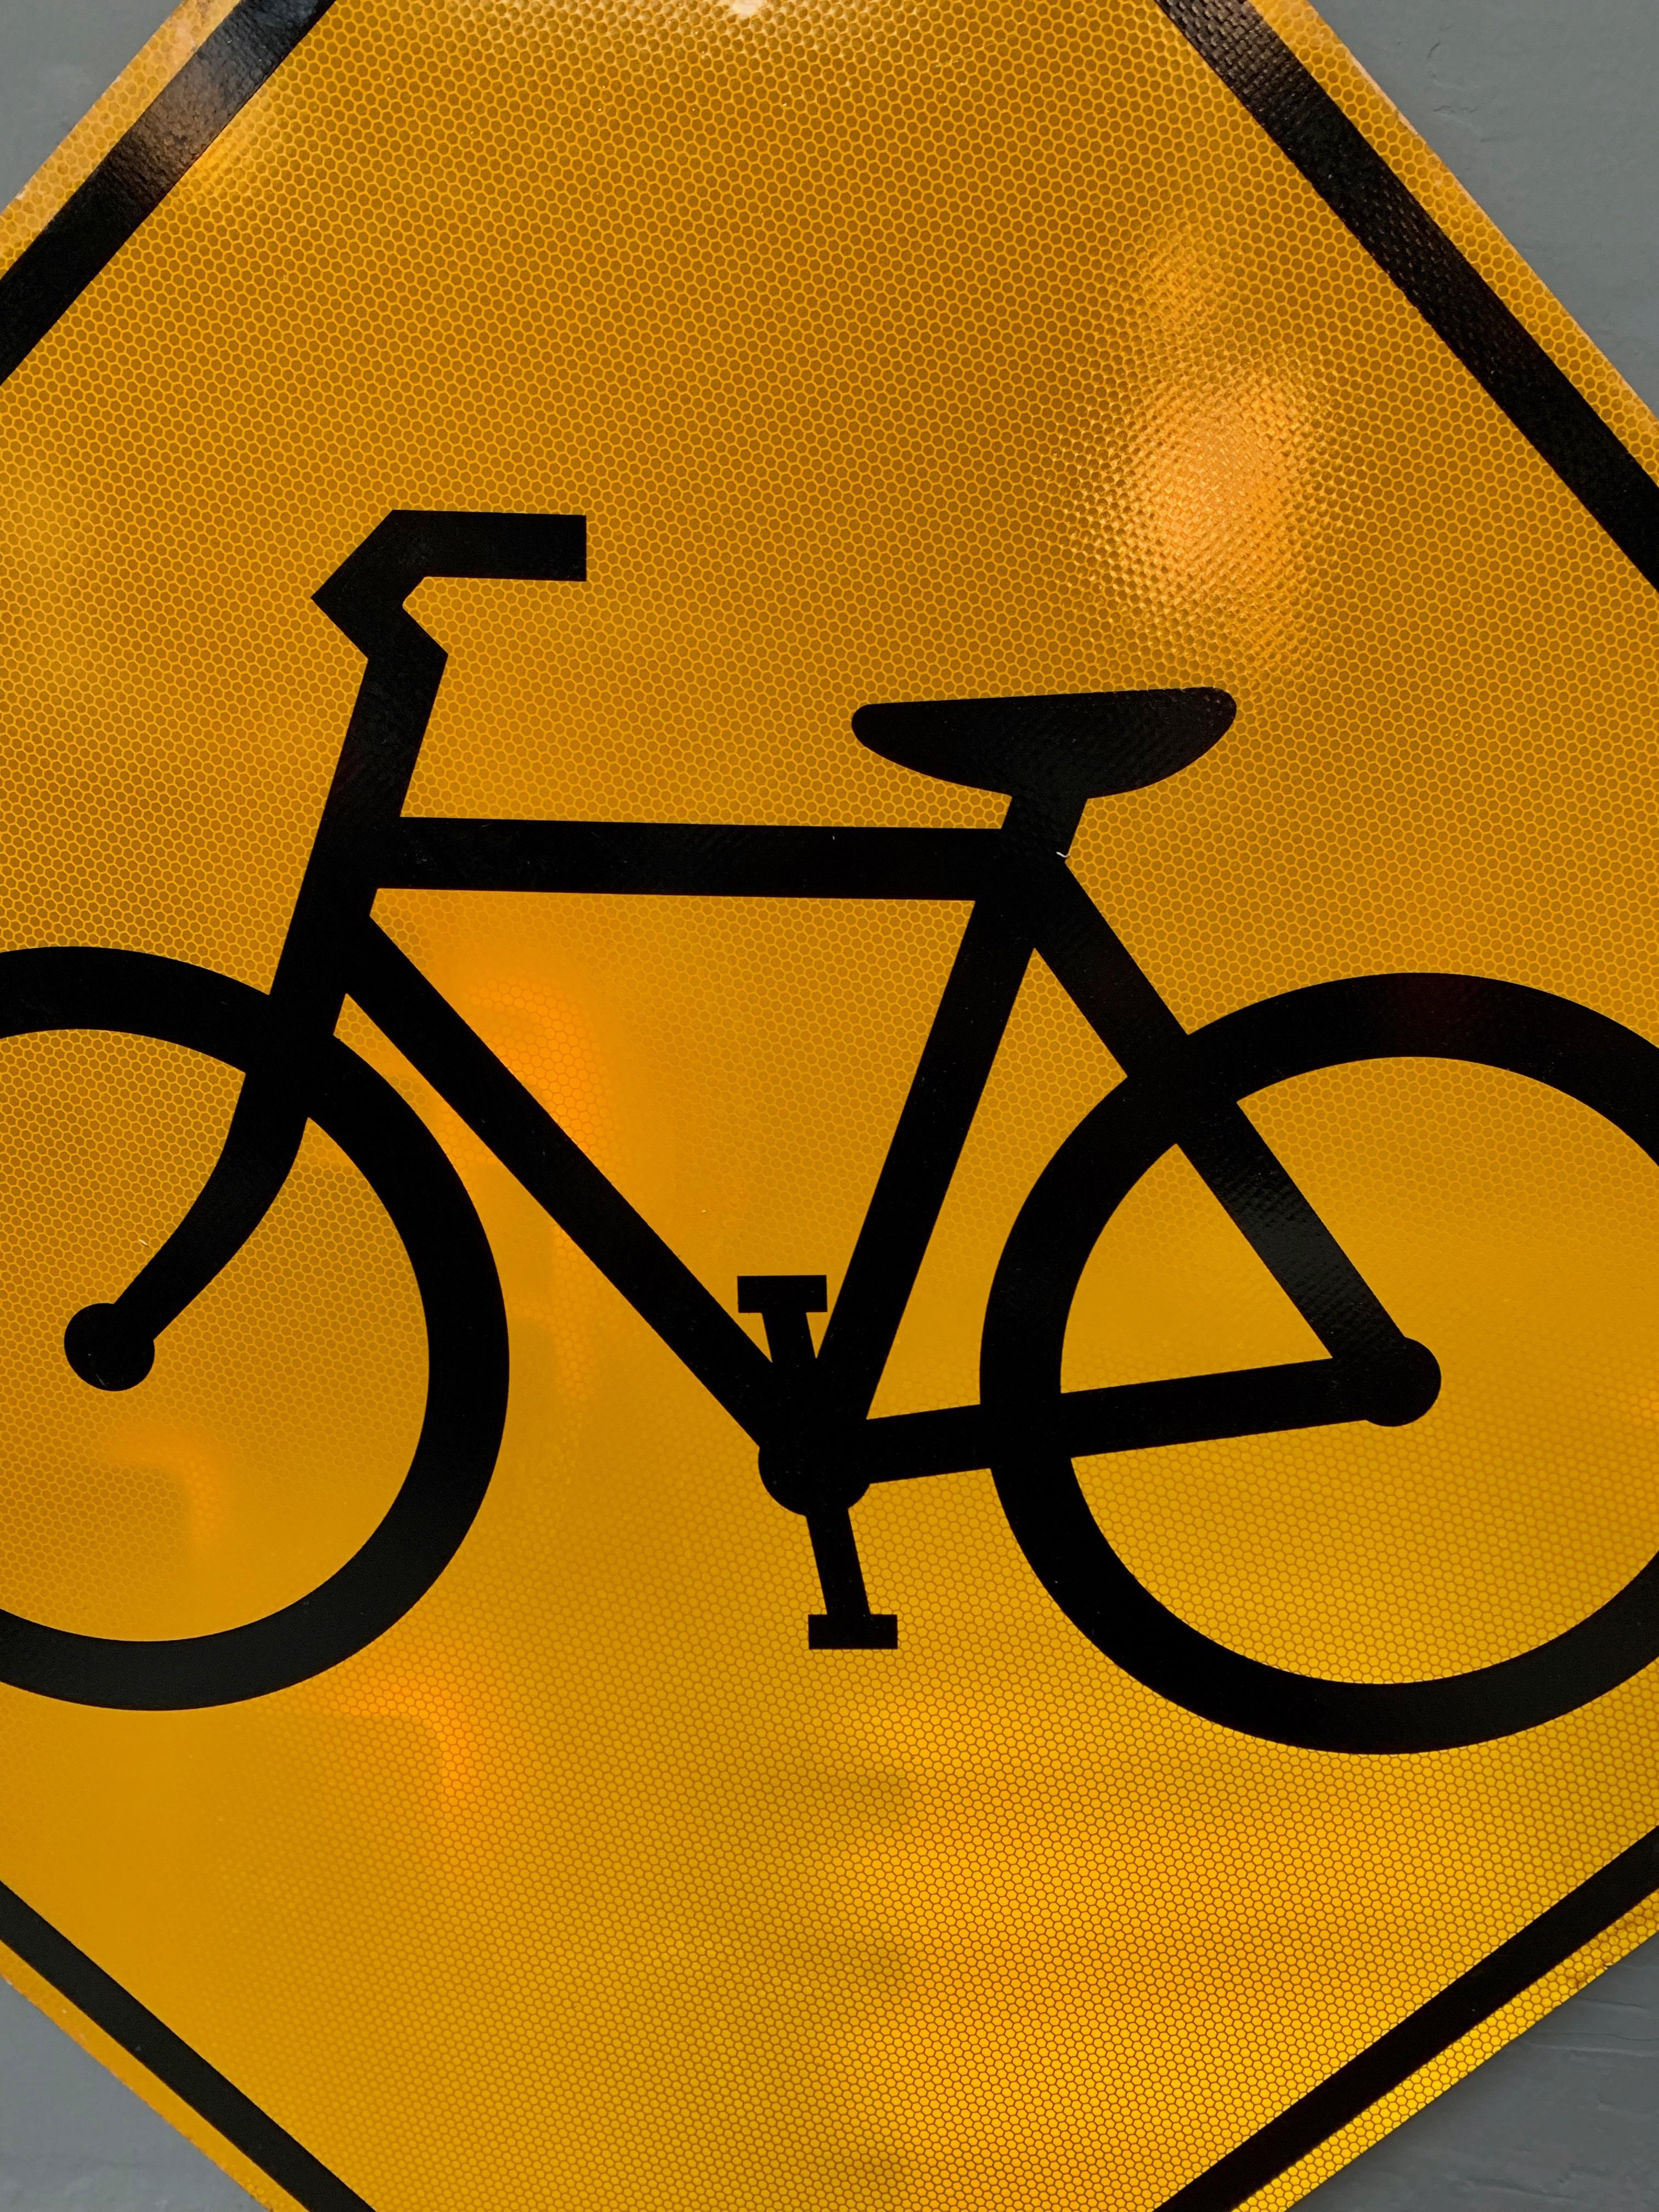 American City of Los Angeles Yellow Bike Sign